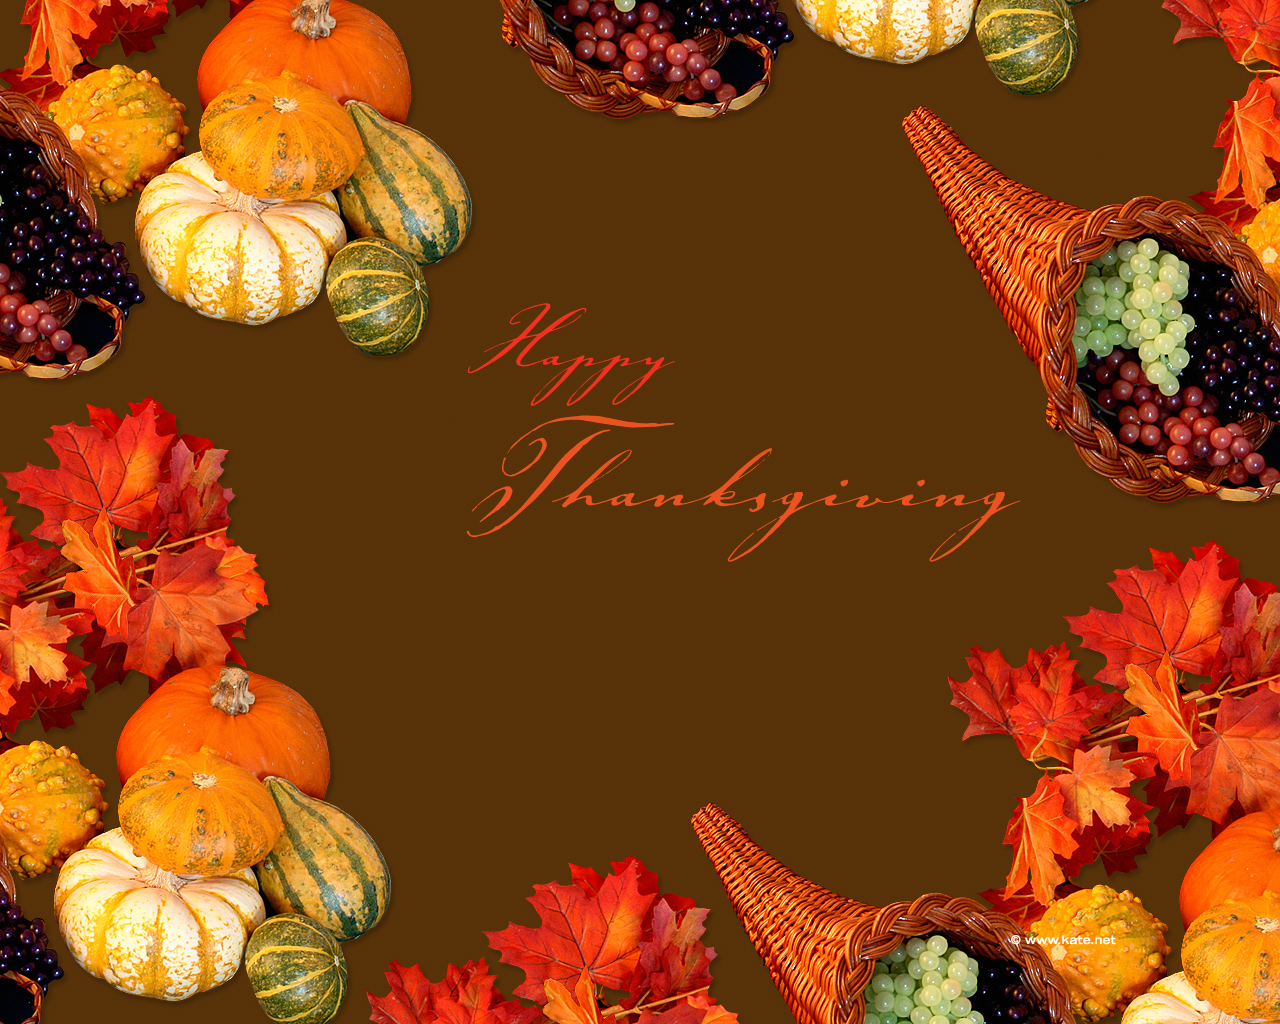 Saw I Learned Share Thanksgiving Powerpoint Background